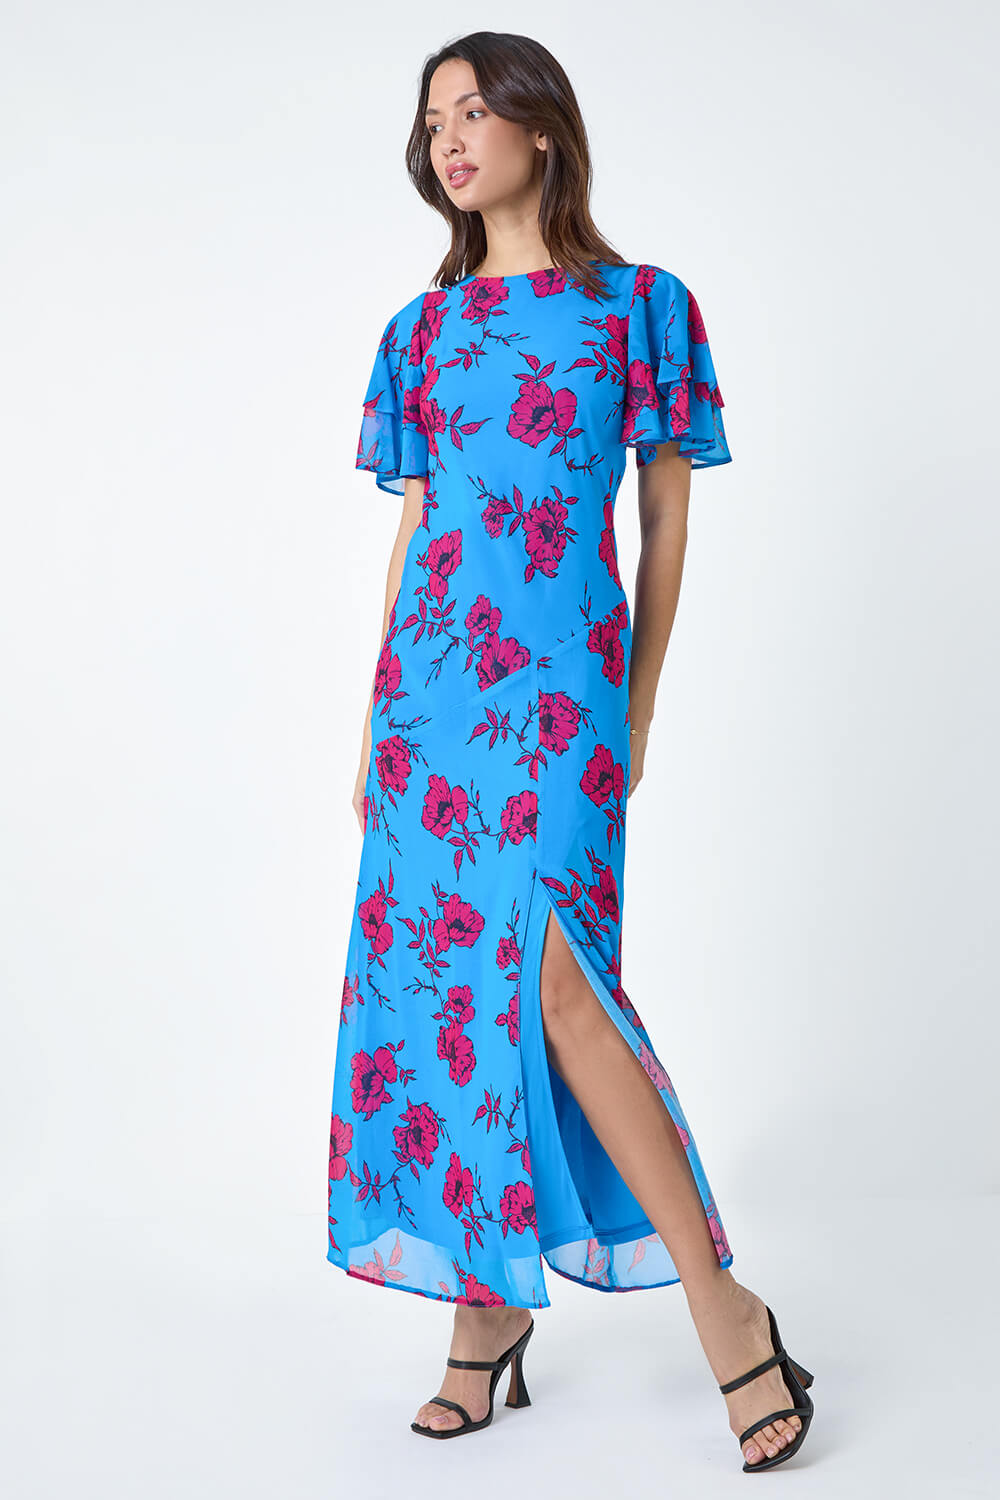 Blue Floral Tiered Sleeve Maxi Dress, Image 2 of 6